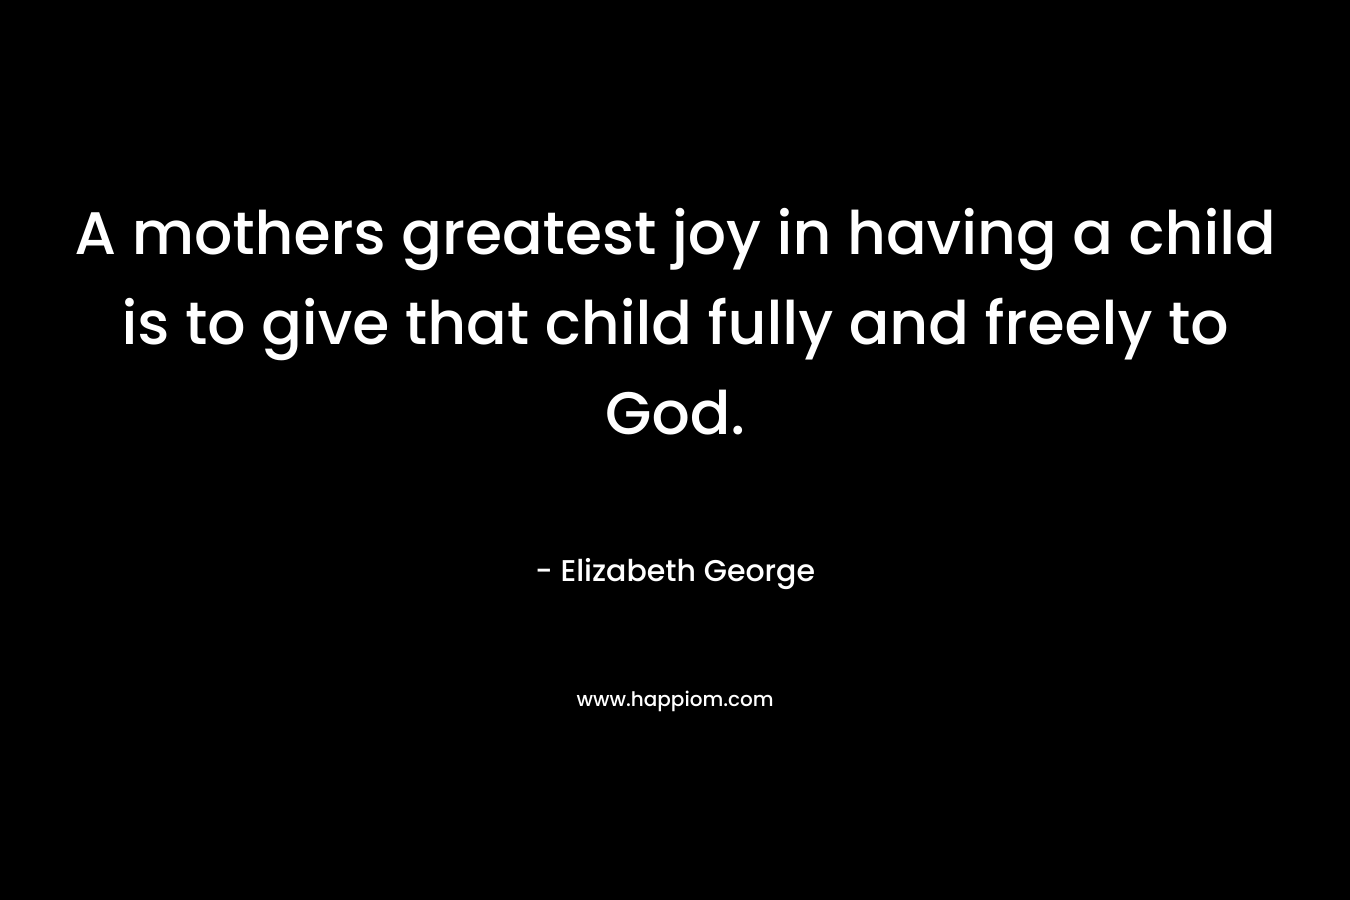 A mothers greatest joy in having a child is to give that child fully and freely to God.